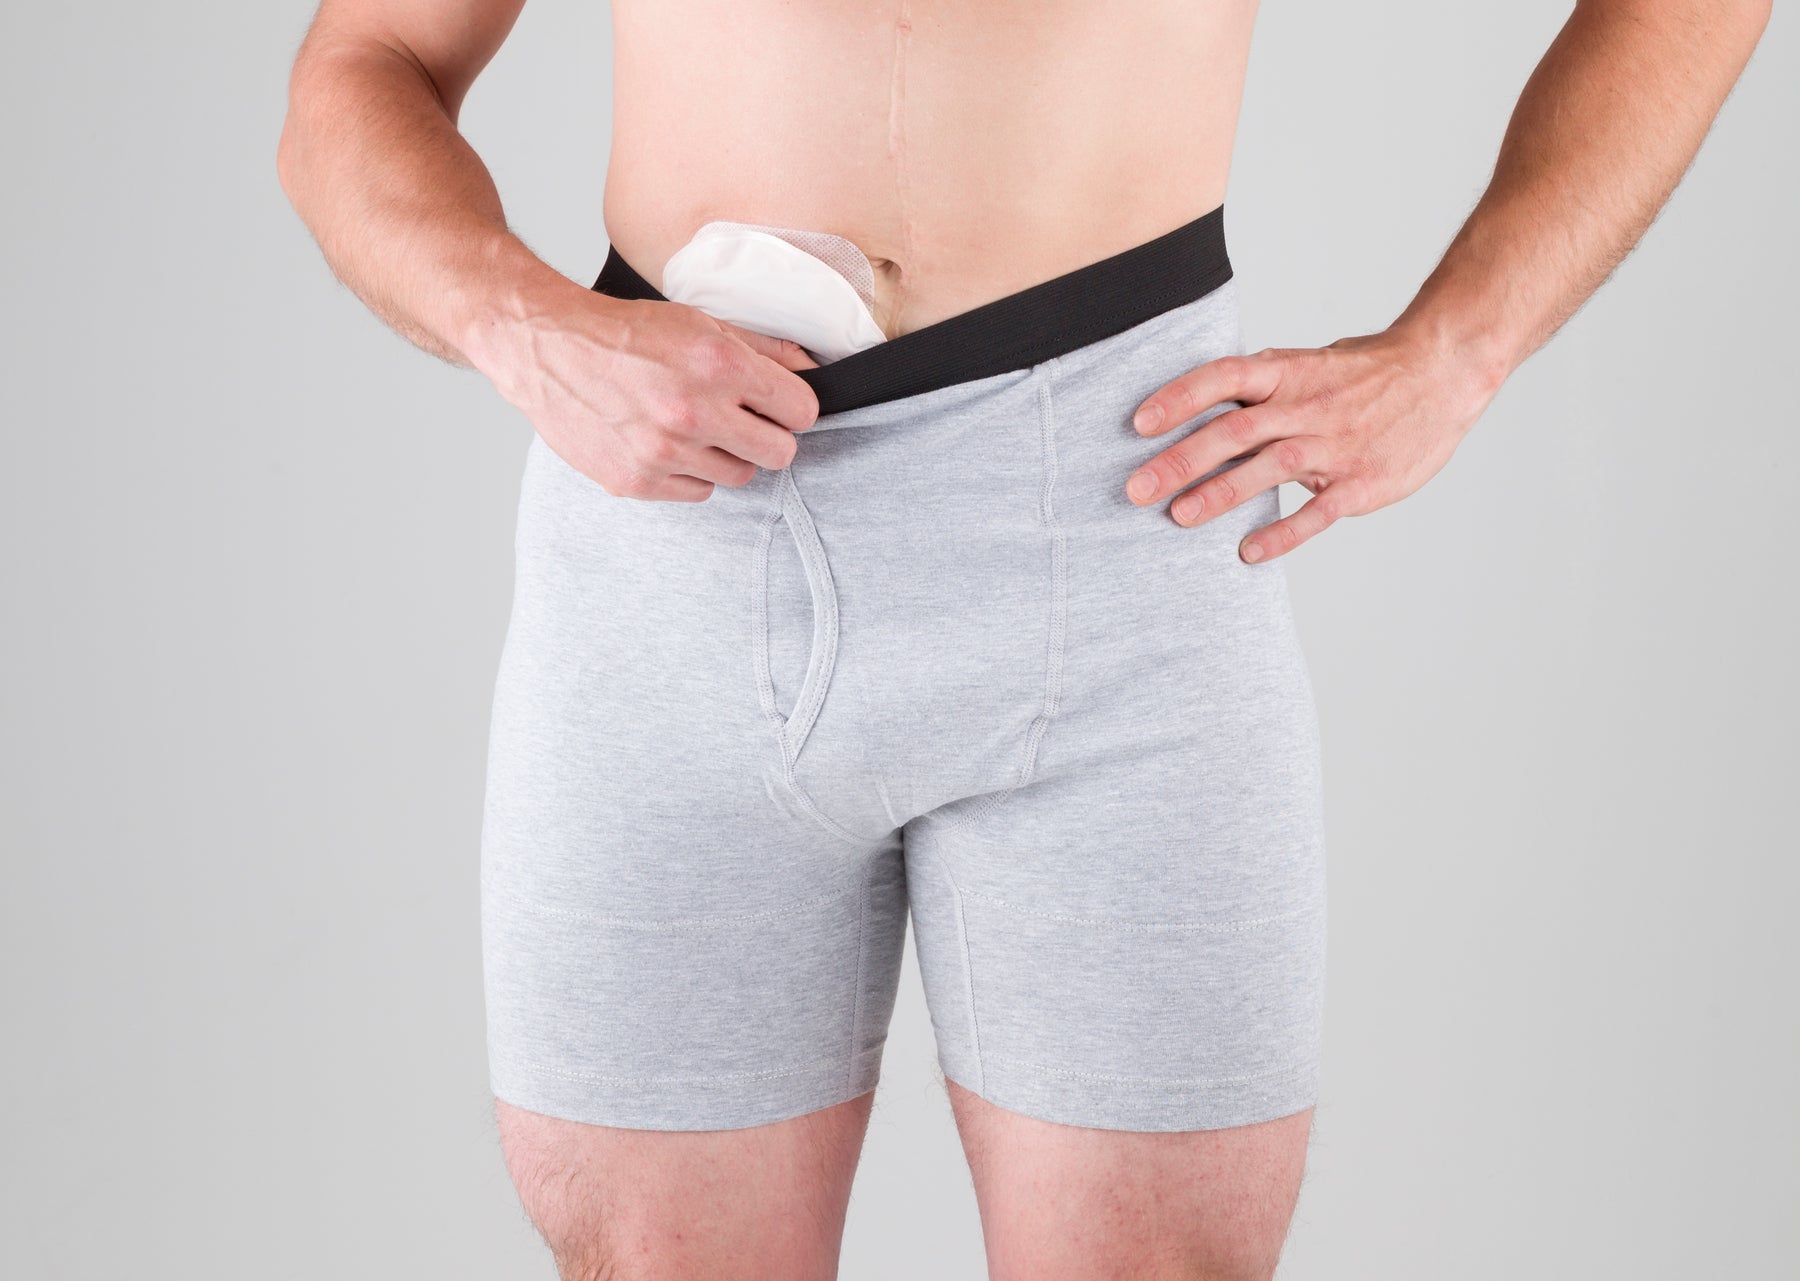 Mens Briefs with Pocket for Stoma / Ostomy Bag – Available in 4 sizes